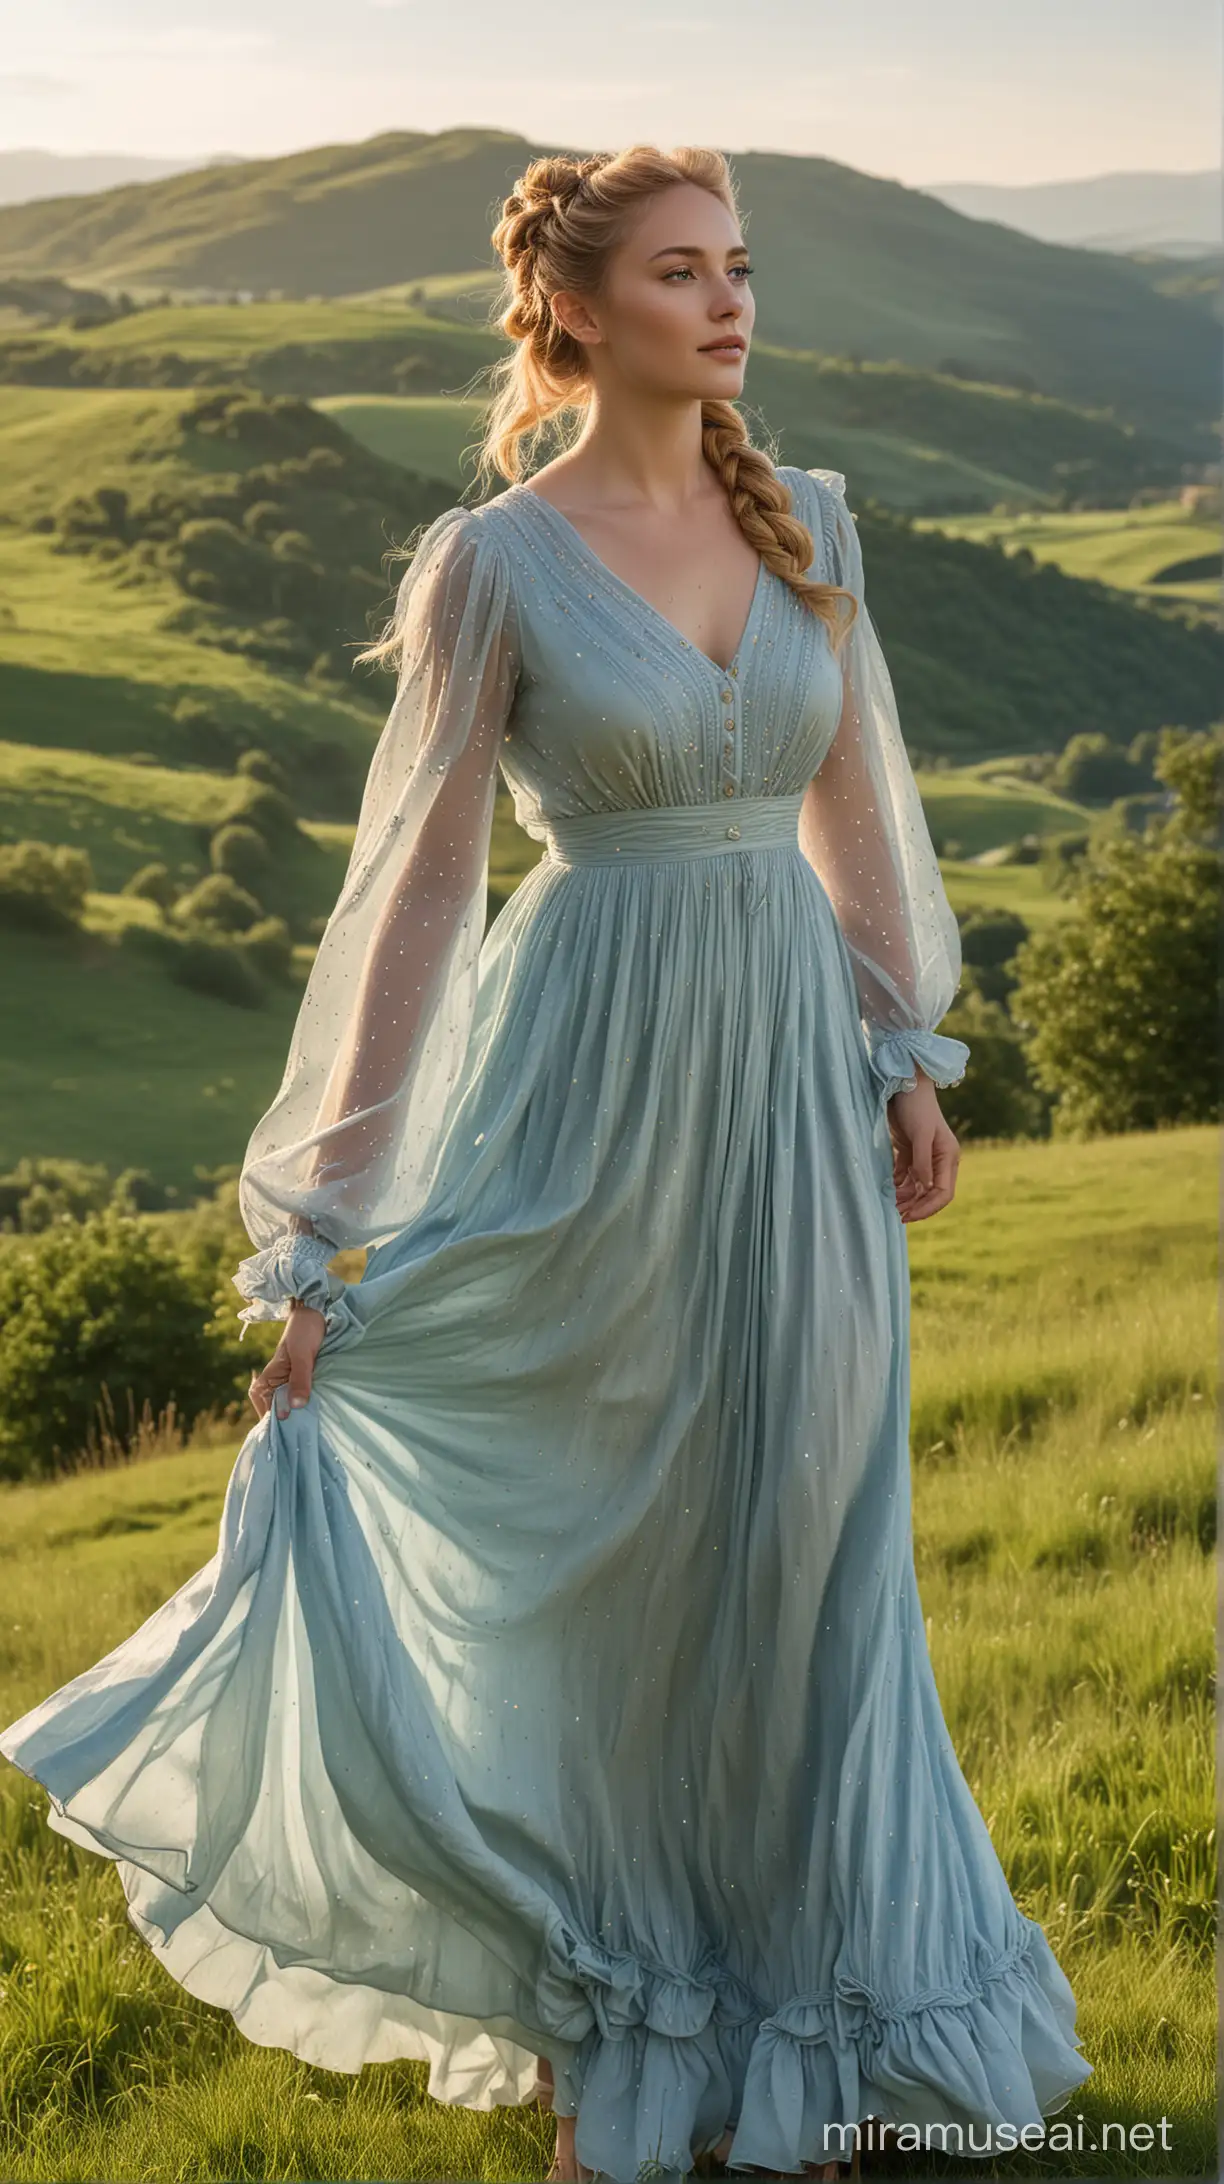 Elegant Young Woman in Blue Gown Amidst Lush Green Hills